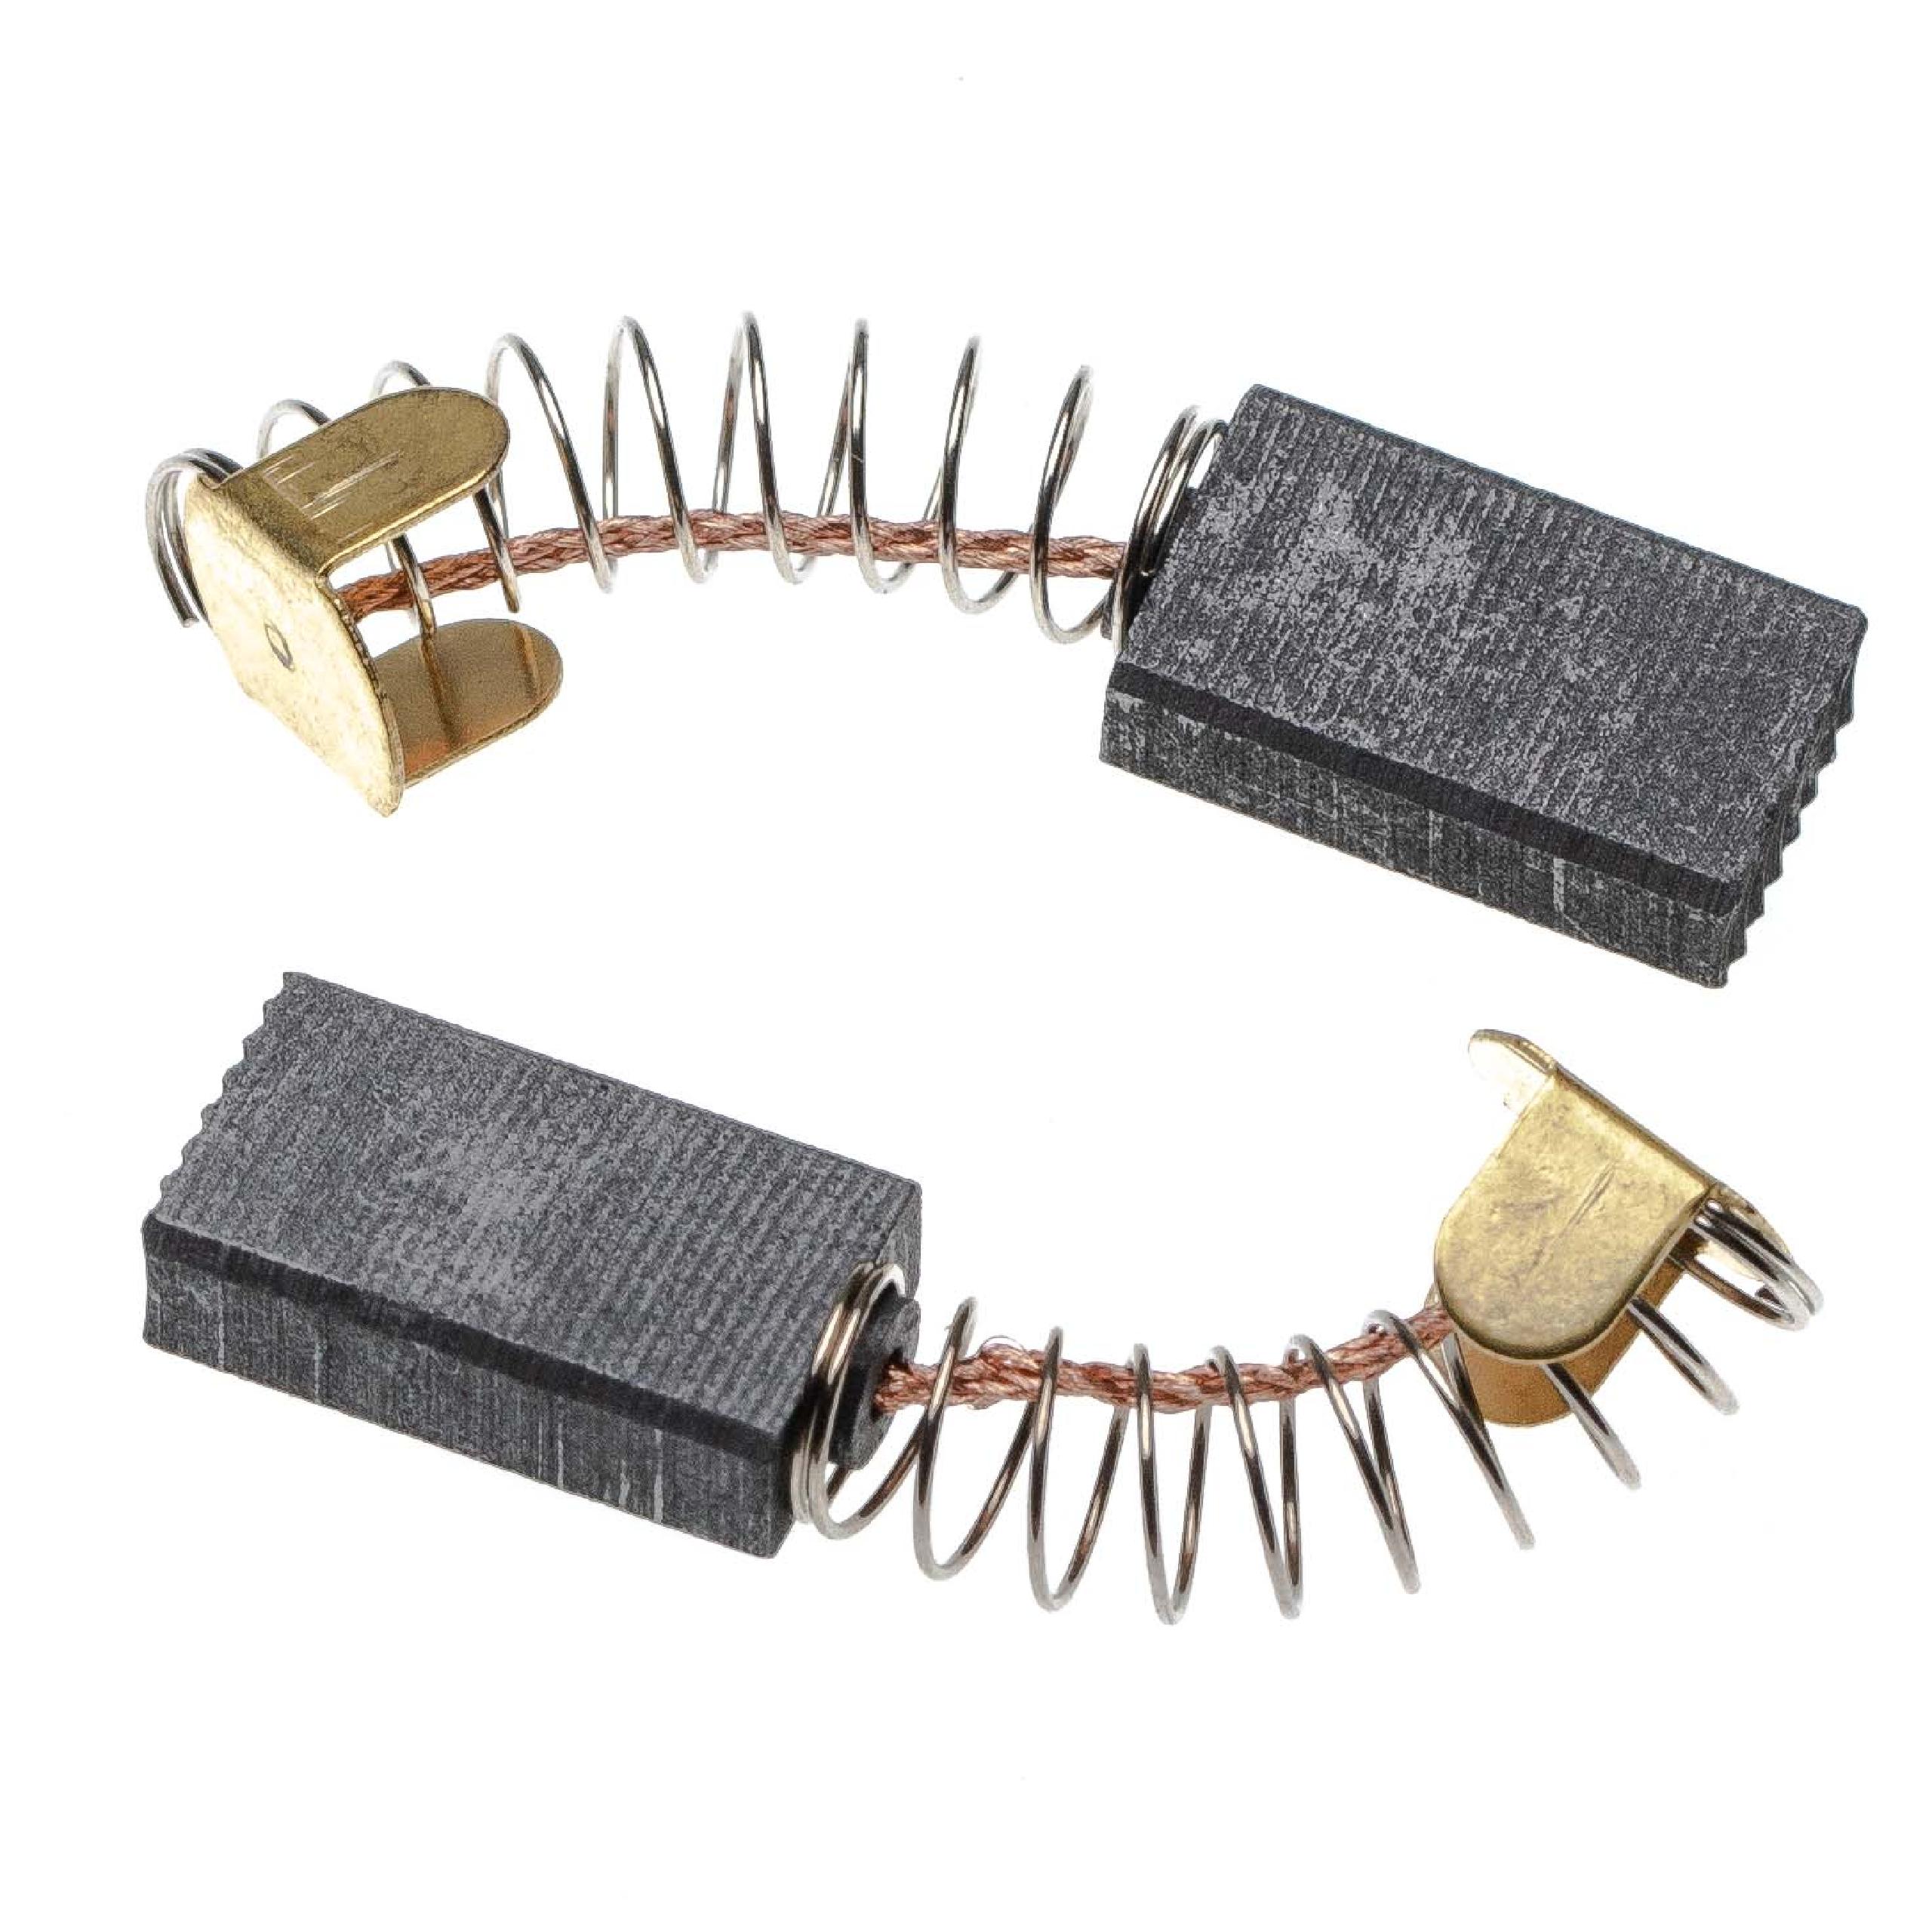 2x Carbon Brush as Replacement for AEG 301359 Electric Power Tools + Spring, 18.5 x 10 x 5mm